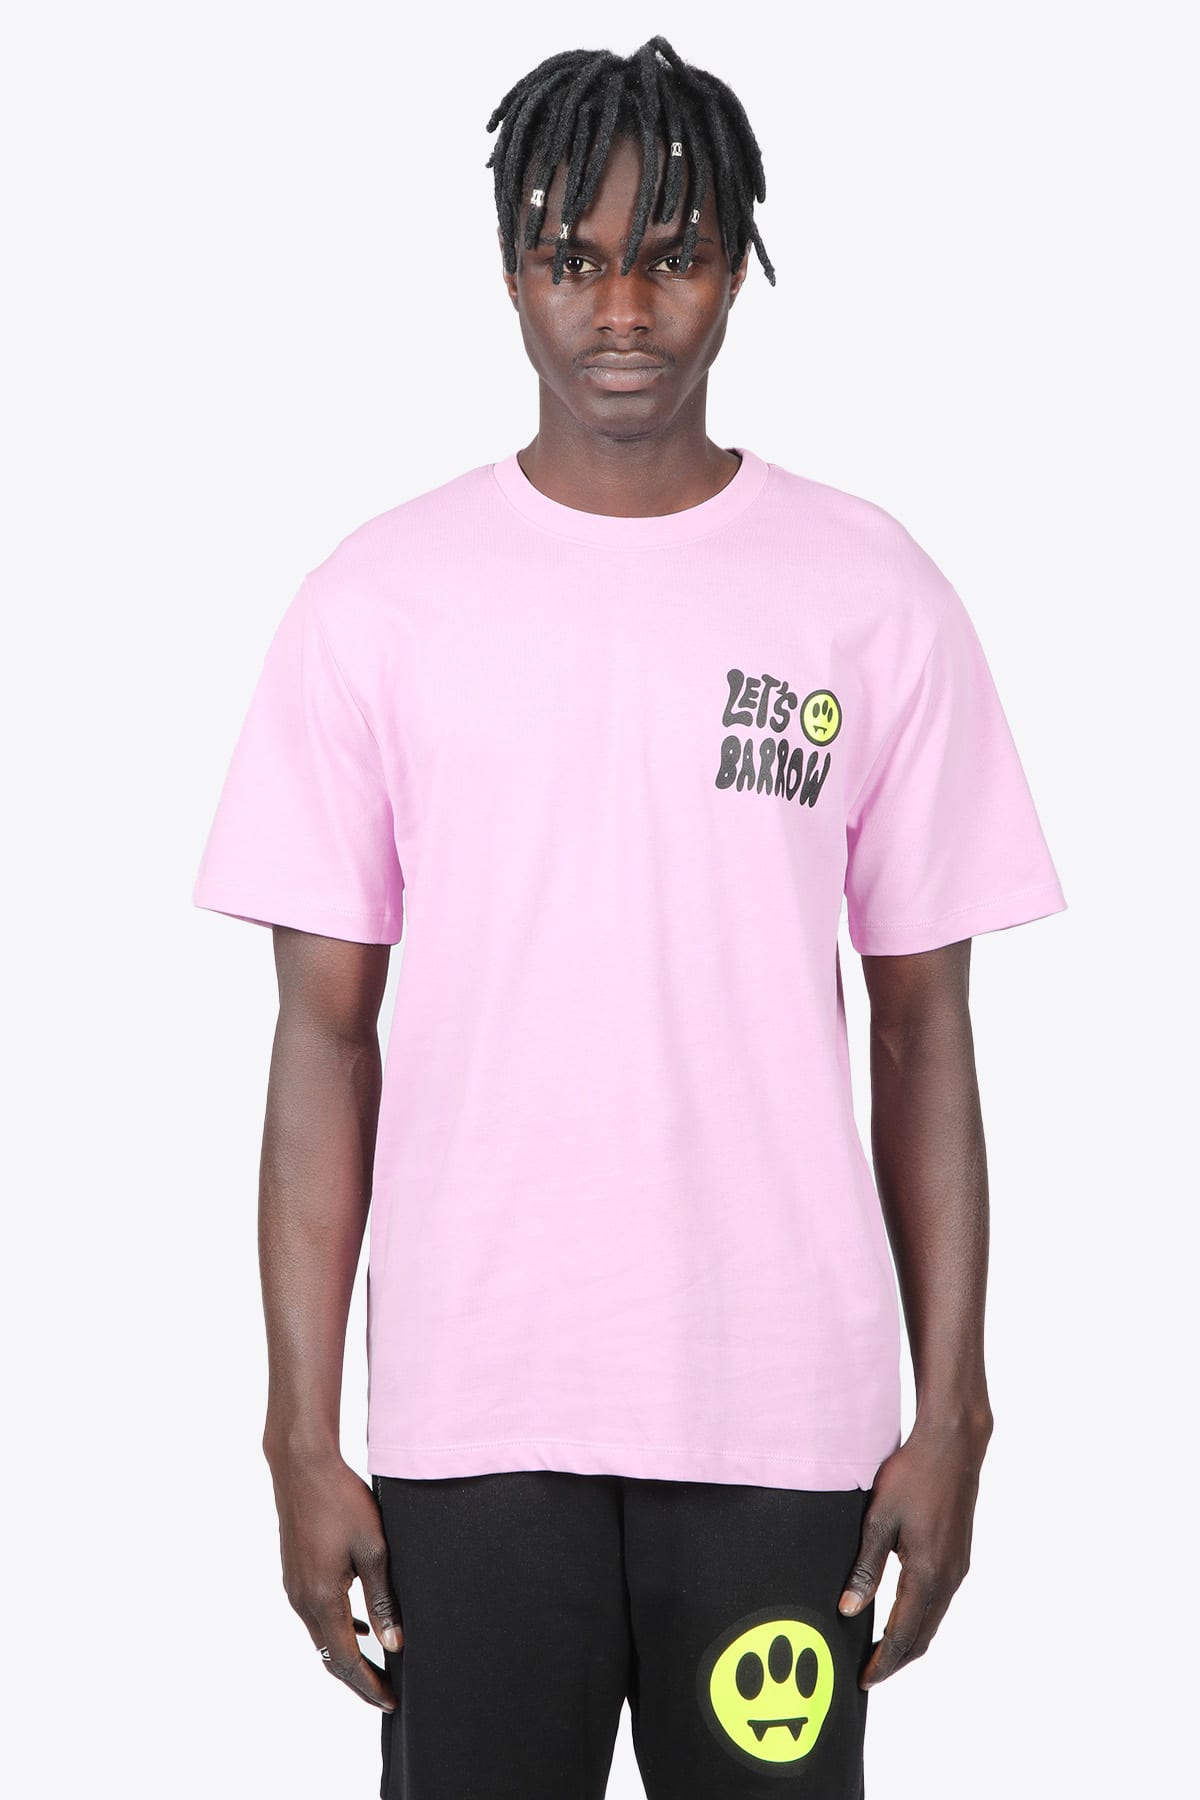 Barrow T-shirt Jersey Unisex Pink cotton t-shirt with strawberry print on back